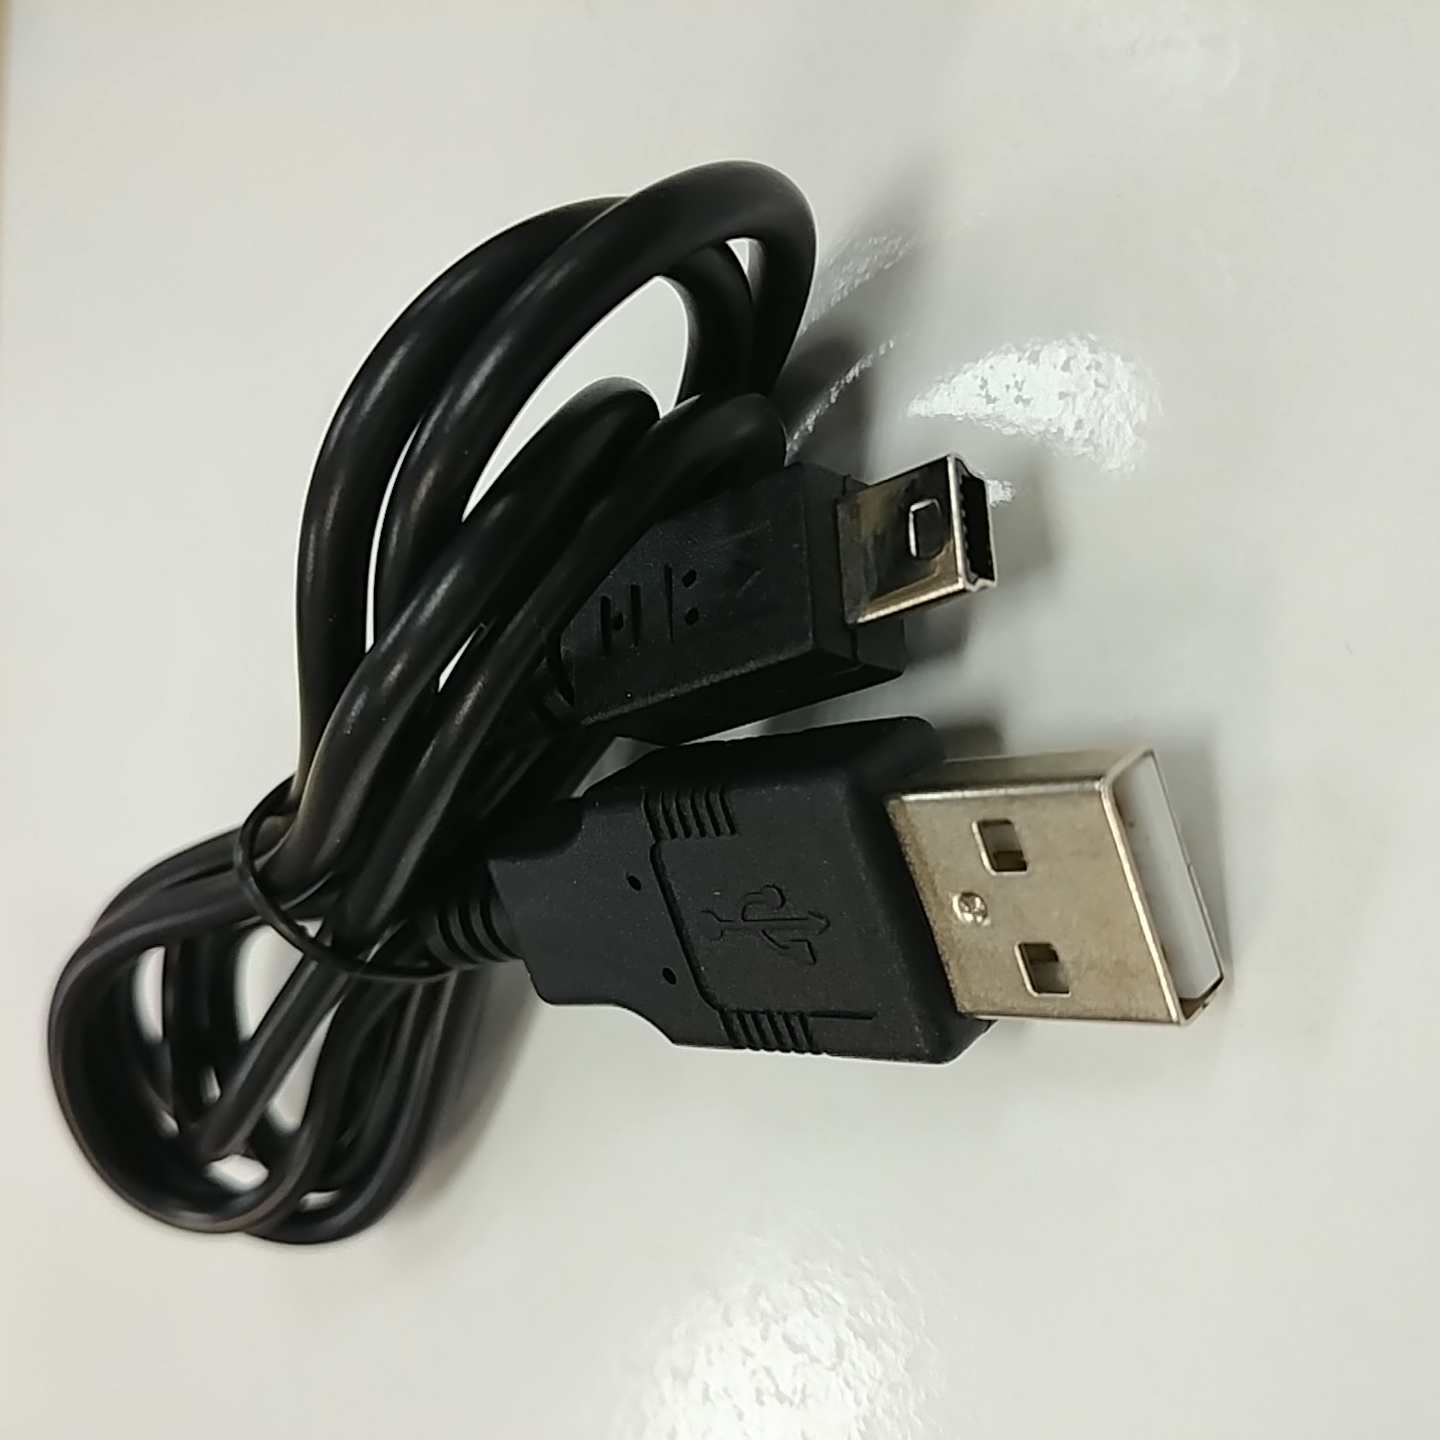 Product Image for API-CABLE